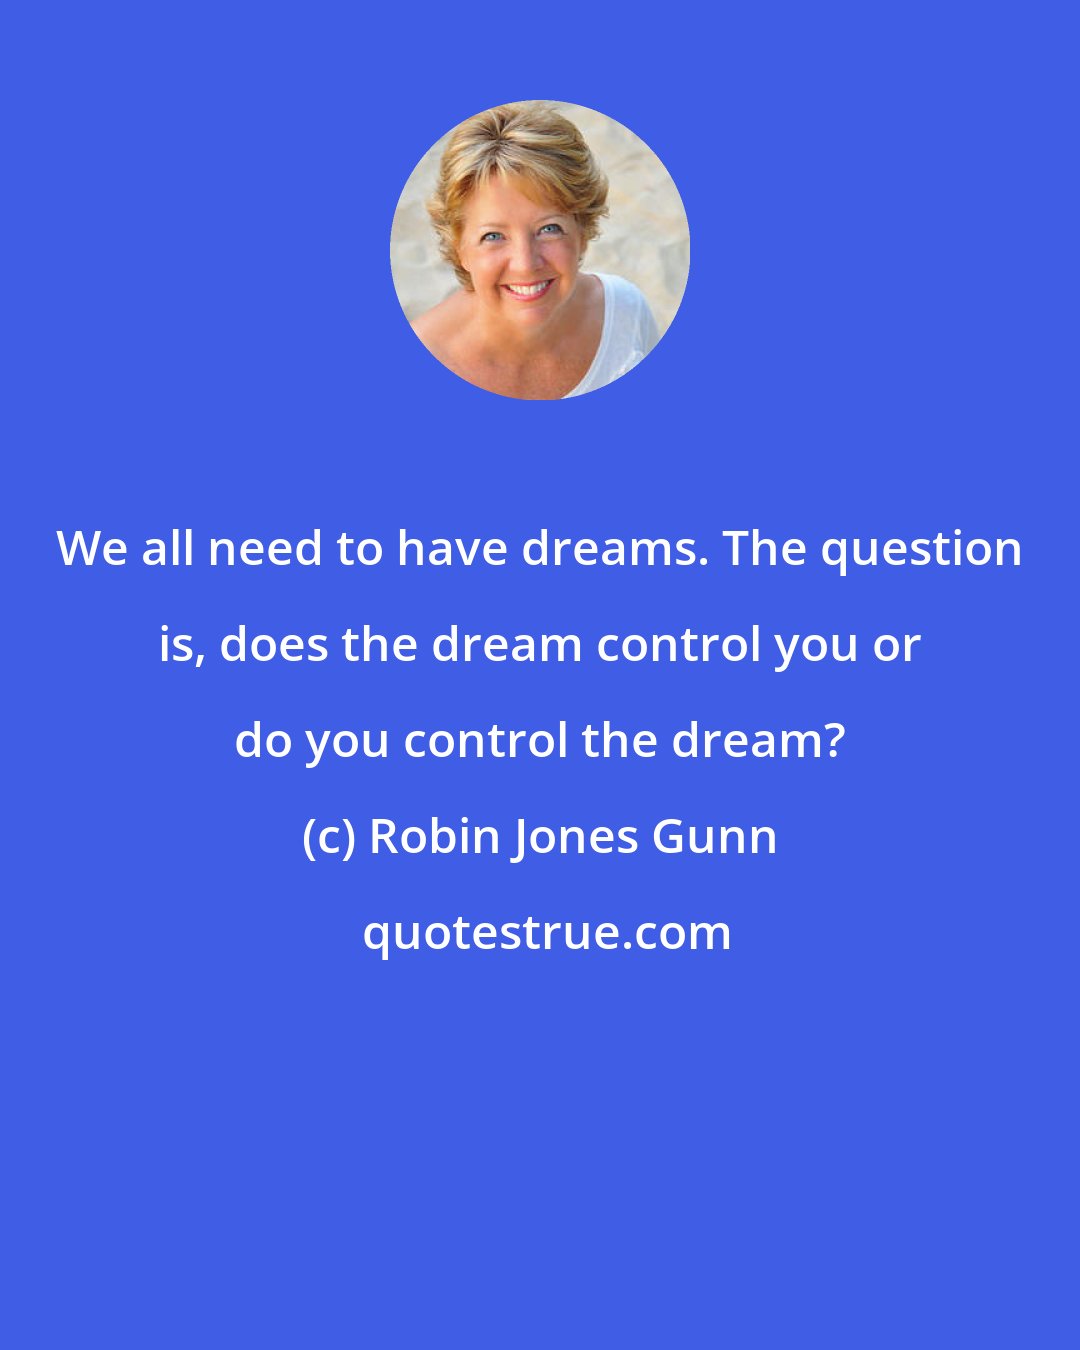 Robin Jones Gunn: We all need to have dreams. The question is, does the dream control you or do you control the dream?